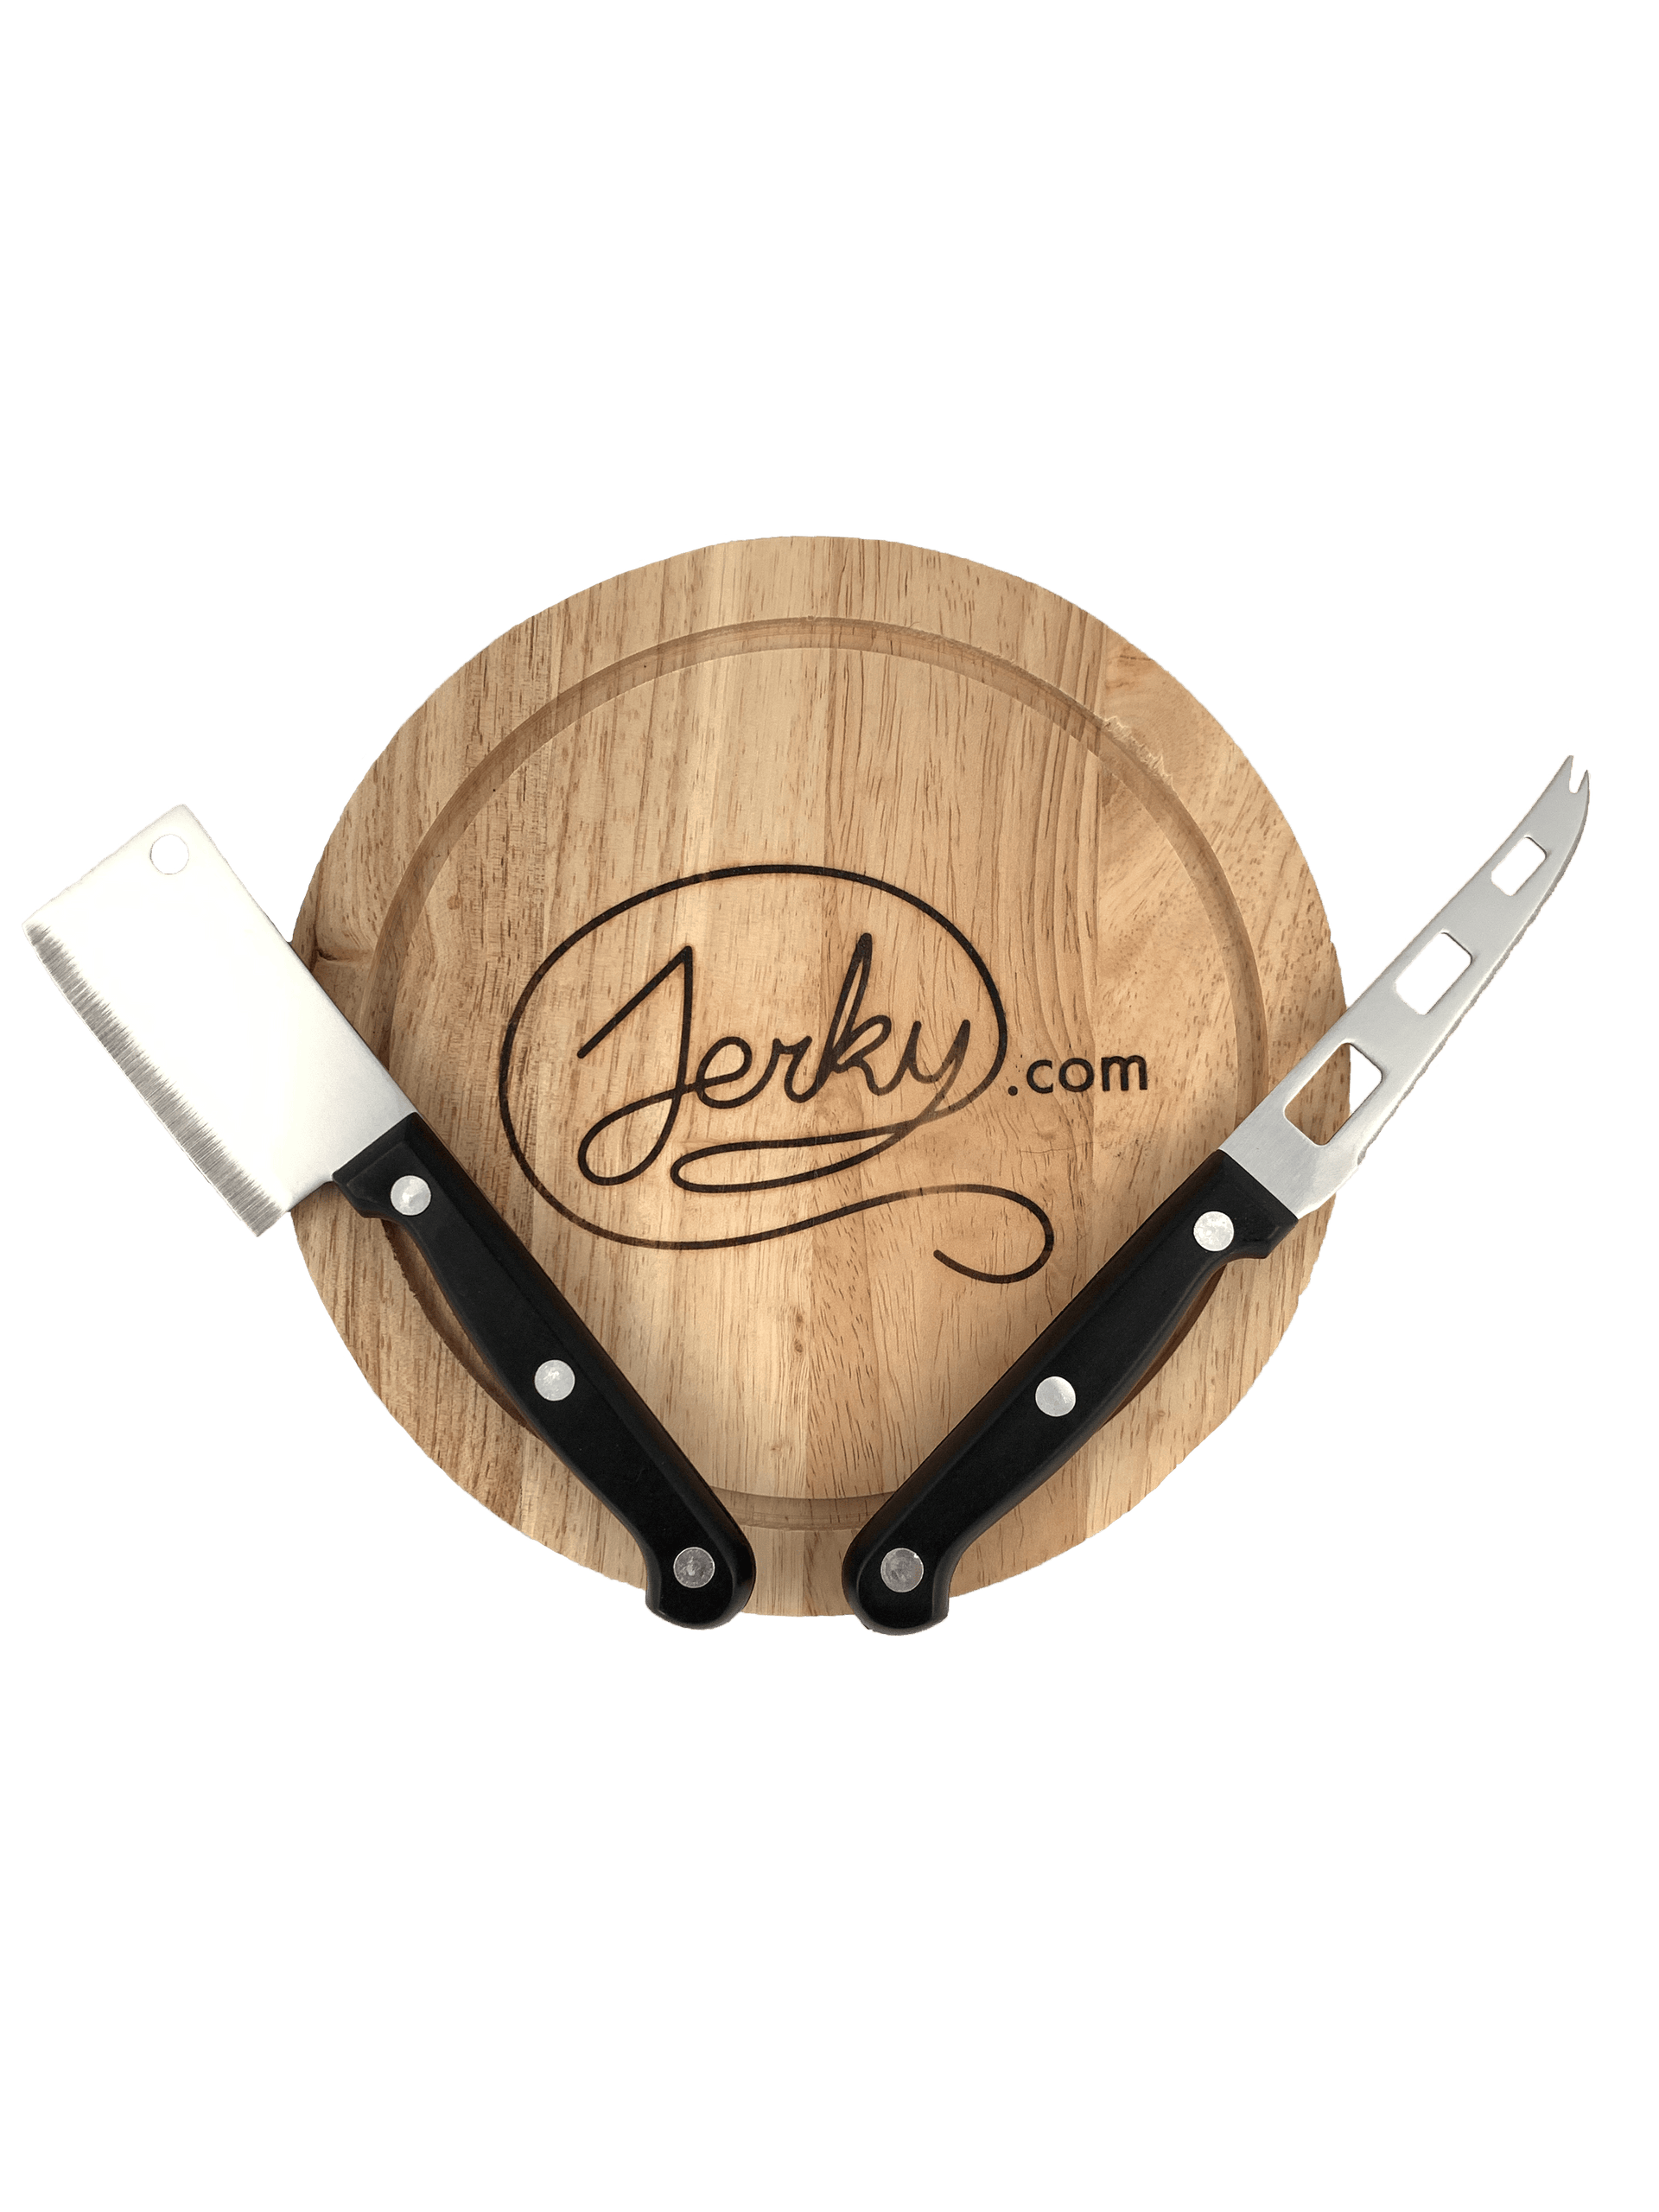 Charcuterie & Cheese Knife Set | 4 PC | Gladiator Series | Dalstrong